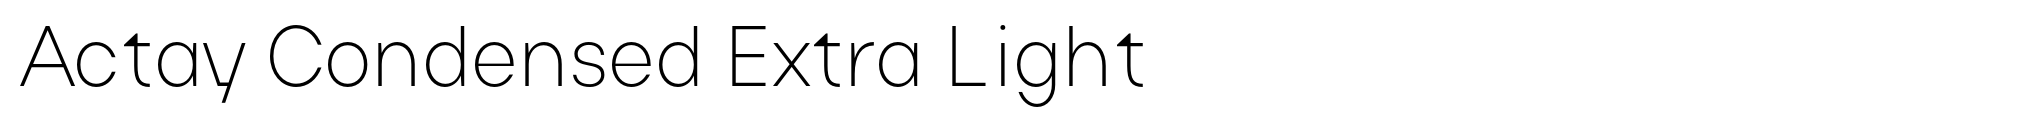 Actay Condensed Extra Light image